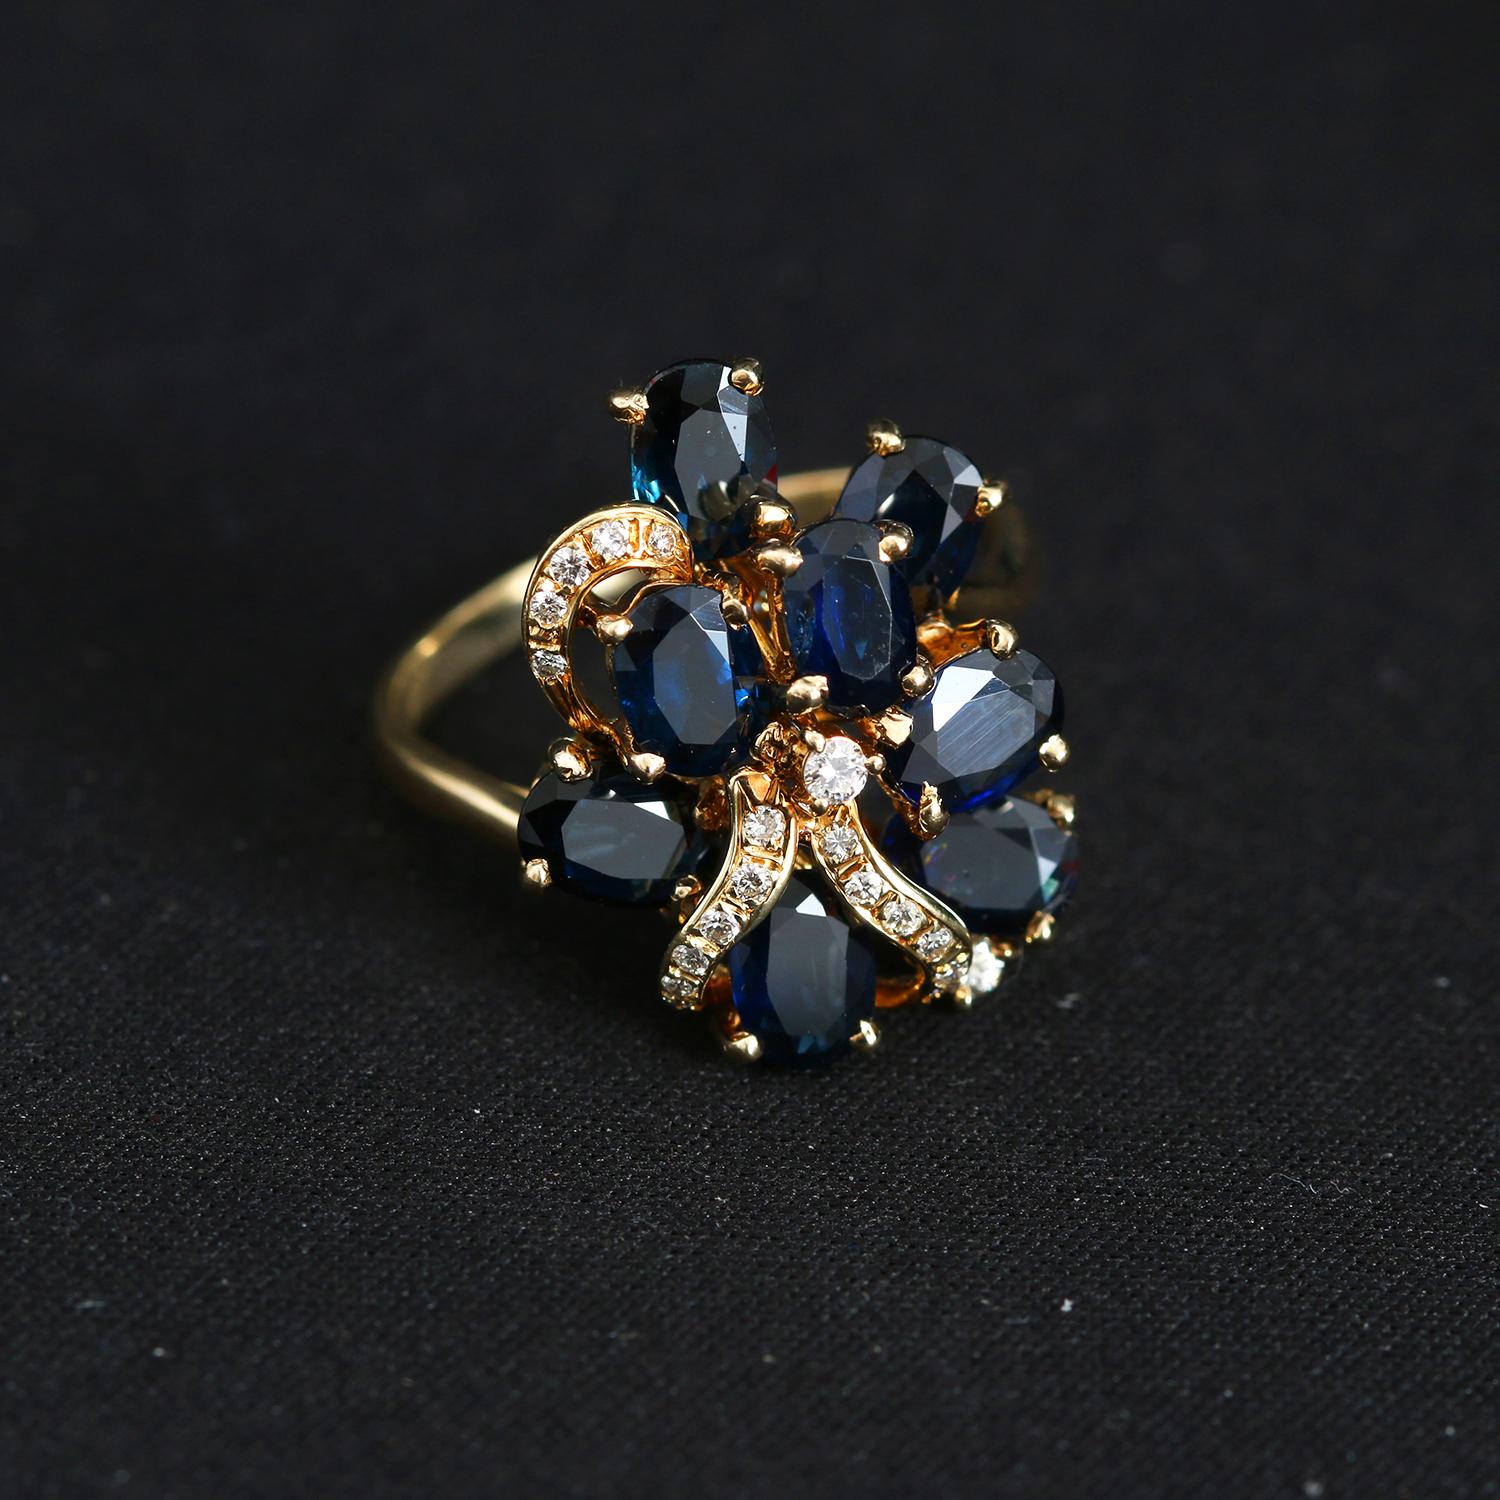 14K Yellow Gold Sapphire & Diamond Ring Size 8.25 - Beautiful flower shaped ring with eight Sapphires and diamonds. Total carat weigh 2.56. Size 8.25 and can be sized .